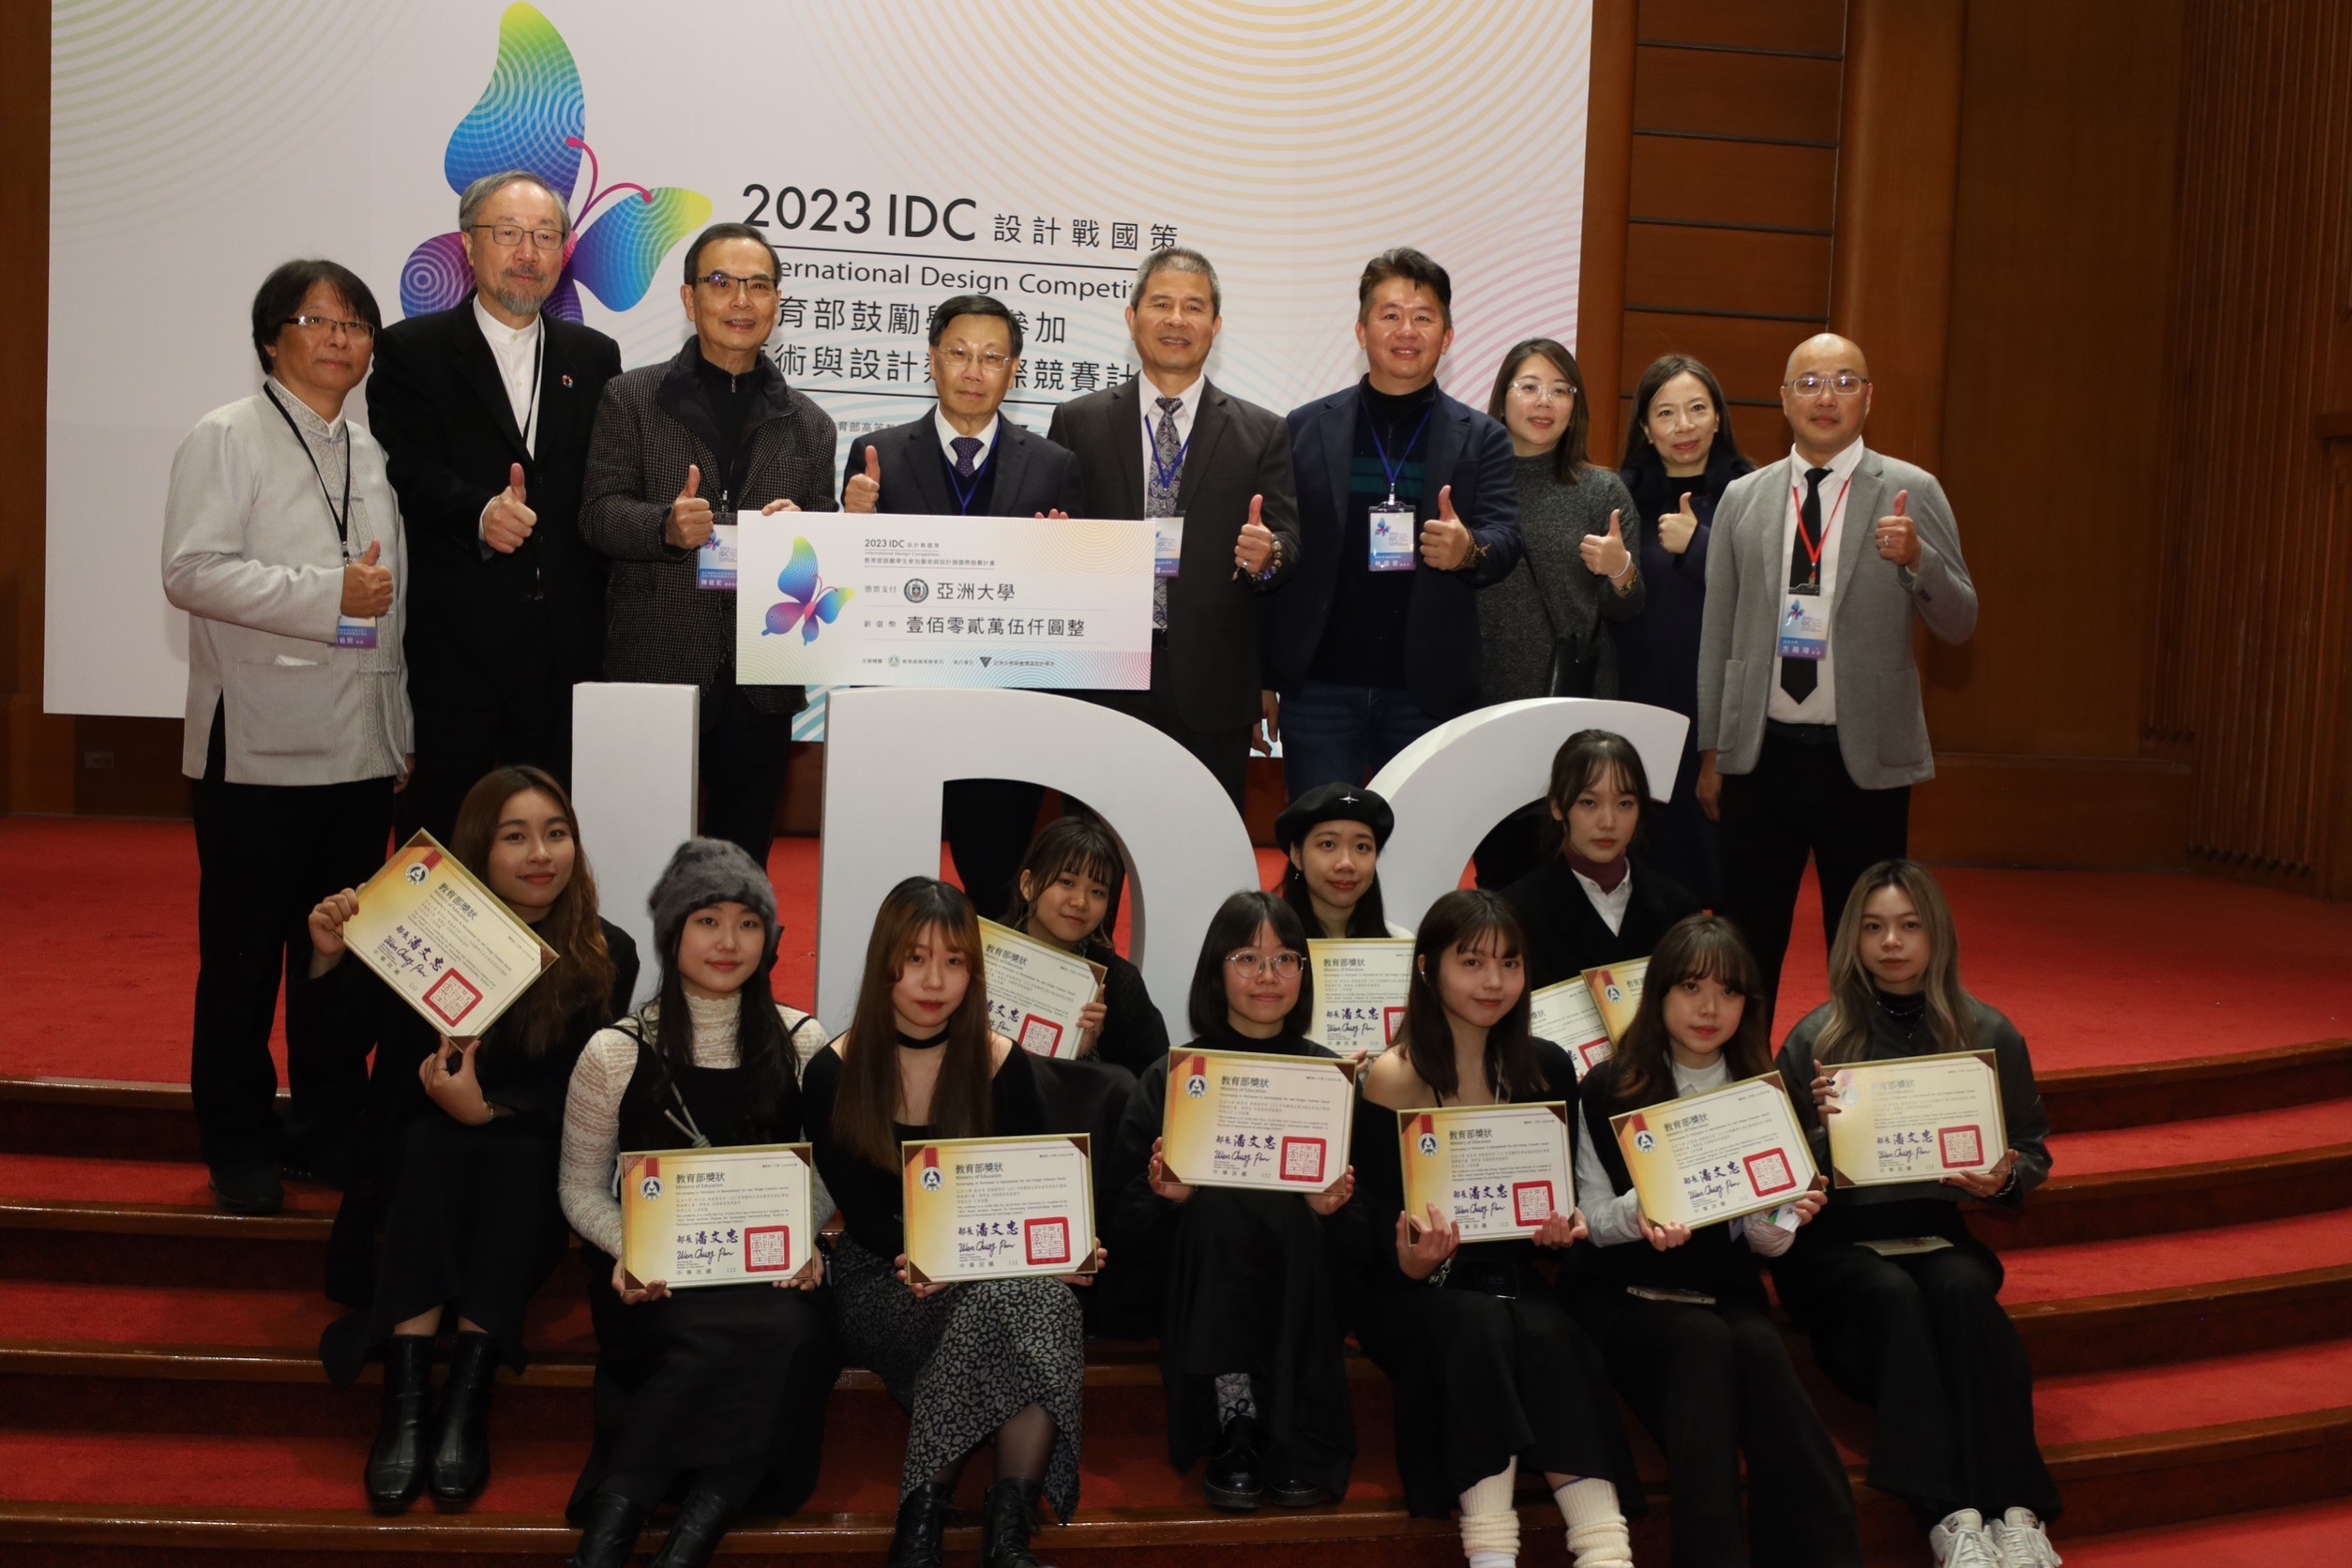 Asia University students participated in the Ministry of Education's '2023 Taiwan International Student Design Competition ' and have consecutively secured the top position in the higher education system for ten years. President Jeffrey J.P. Tsai of Asia University (fourth from the left in the back row) and Pang-Soong Lin, initiator of the ' Award Incentive Program ' and a Chair Professor (second from the left in the back row), were photographed with the winning students and faculty